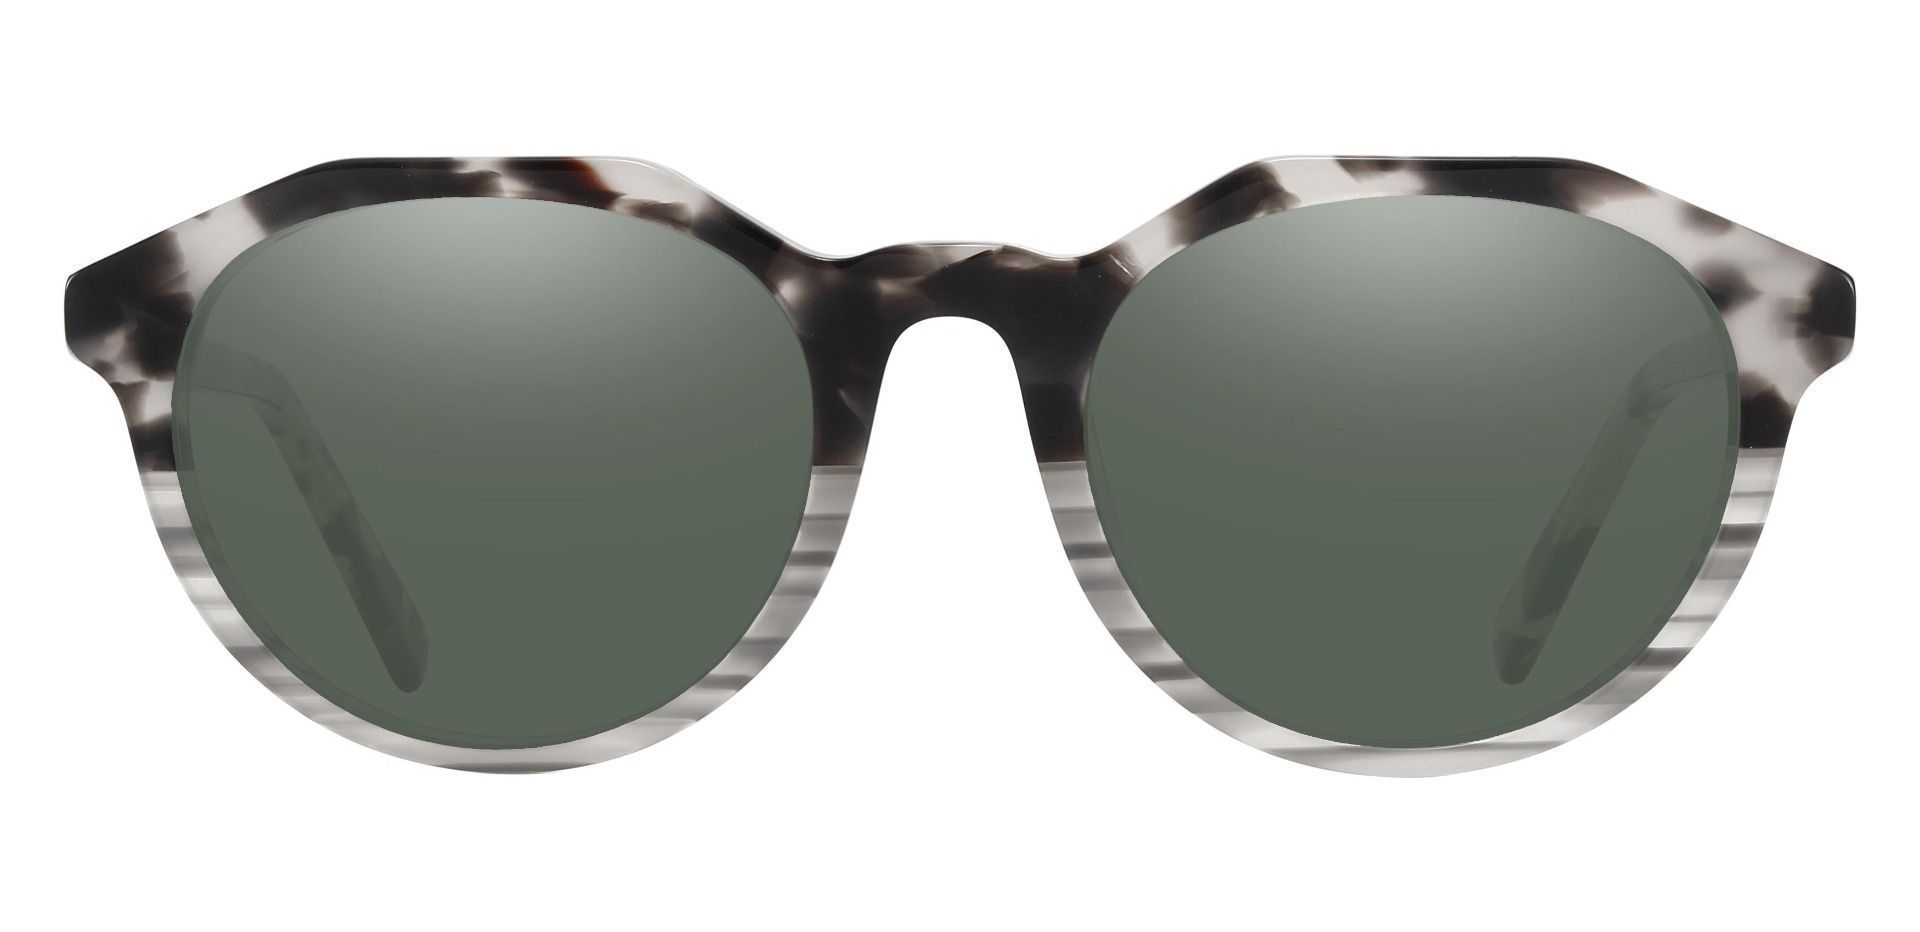 Mayfield Oval Non-Rx Sunglasses - Black Frame With Green Lenses